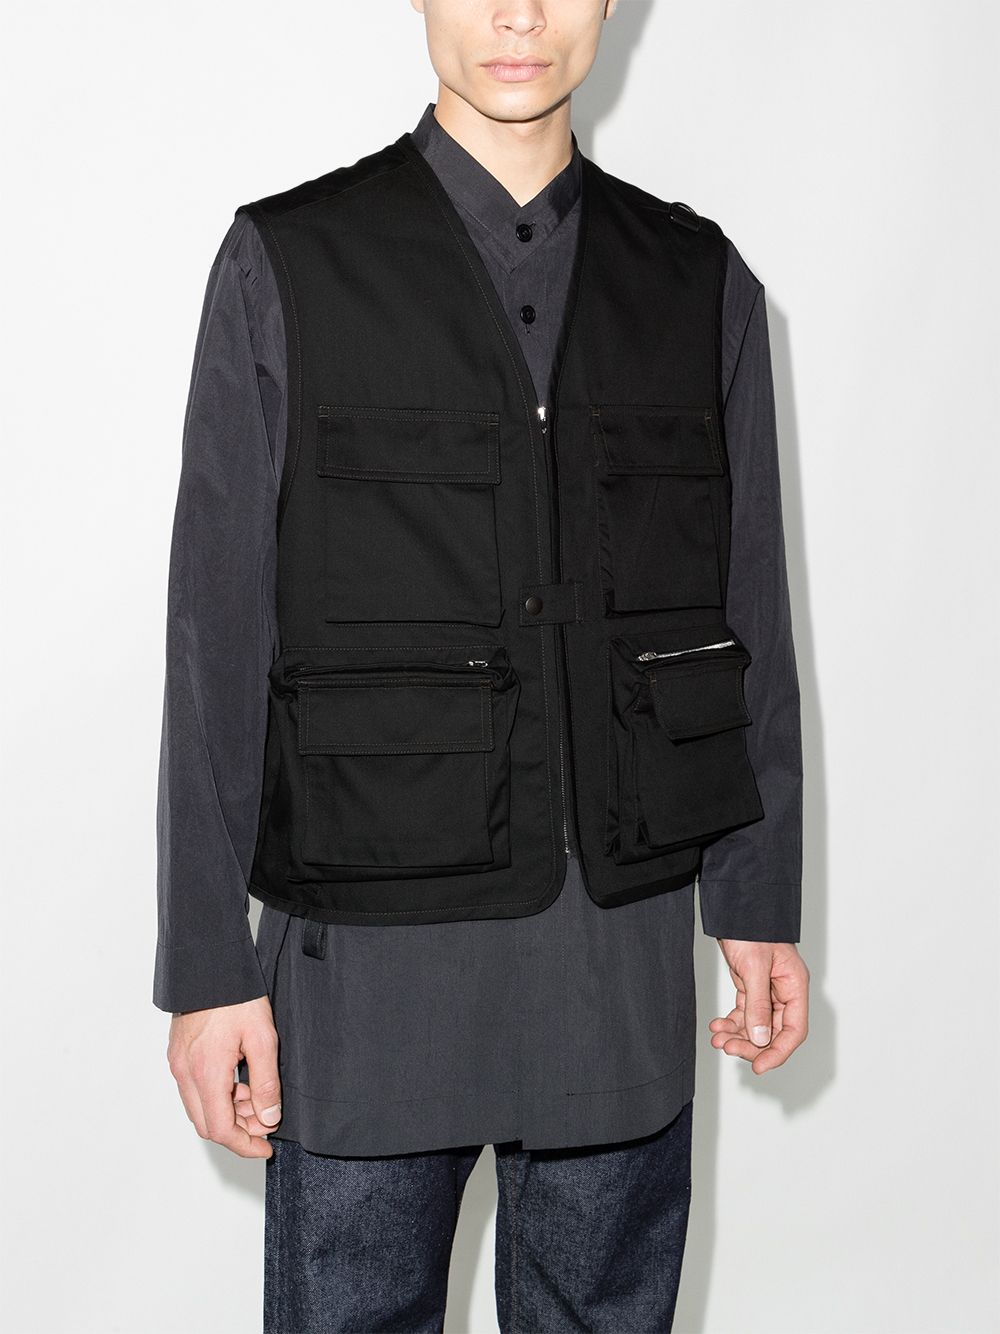 lemaire reporter vest 21aw